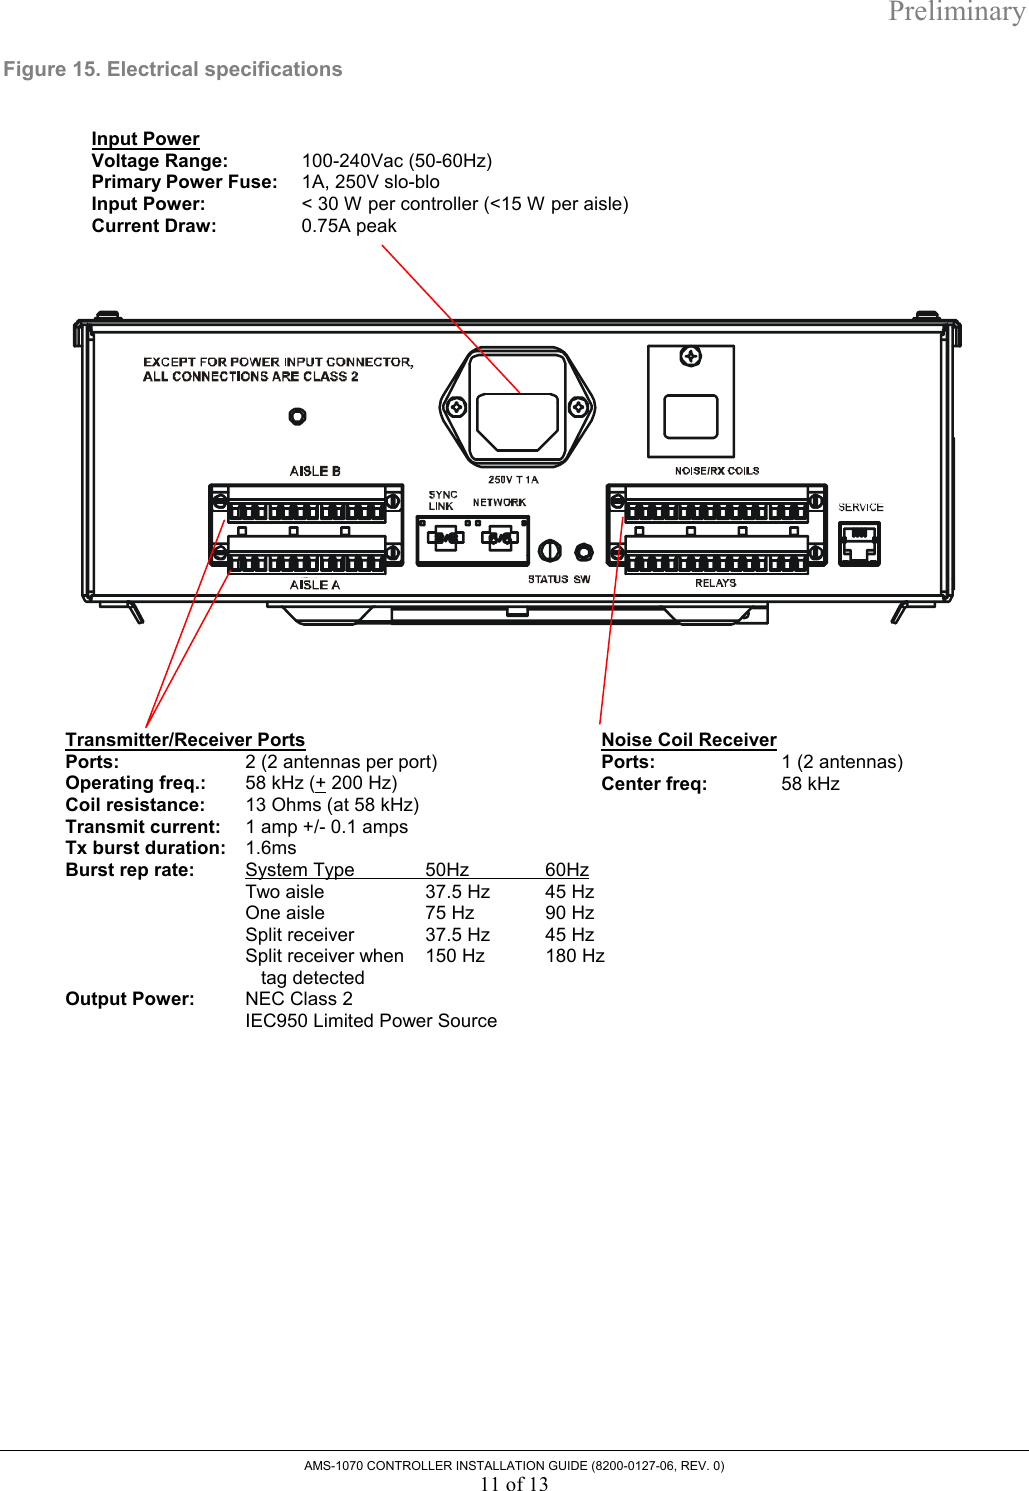 Preliminary AMS-1070 CONTROLLER INSTALLATION GUIDE (8200-0127-06, REV. 0) 11 of 13 Figure 15. Electrical specifications   Input Power Voltage Range:   100-240Vac (50-60Hz) Primary Power Fuse:   1A, 250V slo-blo Input Power:   &lt; 30 W per controller (&lt;15 W per aisle) Current Draw:   0.75A peak Transmitter/Receiver Ports Ports:     2 (2 antennas per port) Operating freq.:    58 kHz (+ 200 Hz) Coil resistance:  13 Ohms (at 58 kHz) Transmit current:  1 amp +/- 0.1 amps Tx burst duration:  1.6ms Burst rep rate:     System Type  50Hz  60Hz     Two aisle    37.5 Hz  45 Hz     One aisle    75 Hz    90 Hz     Split receiver    37.5 Hz  45 Hz     Split receiver when  150 Hz  180 Hz       tag detected Output Power:  NEC Class 2 IEC950 Limited Power Source Noise Coil Receiver Ports:     1 (2 antennas) Center freq:     58 kHz 